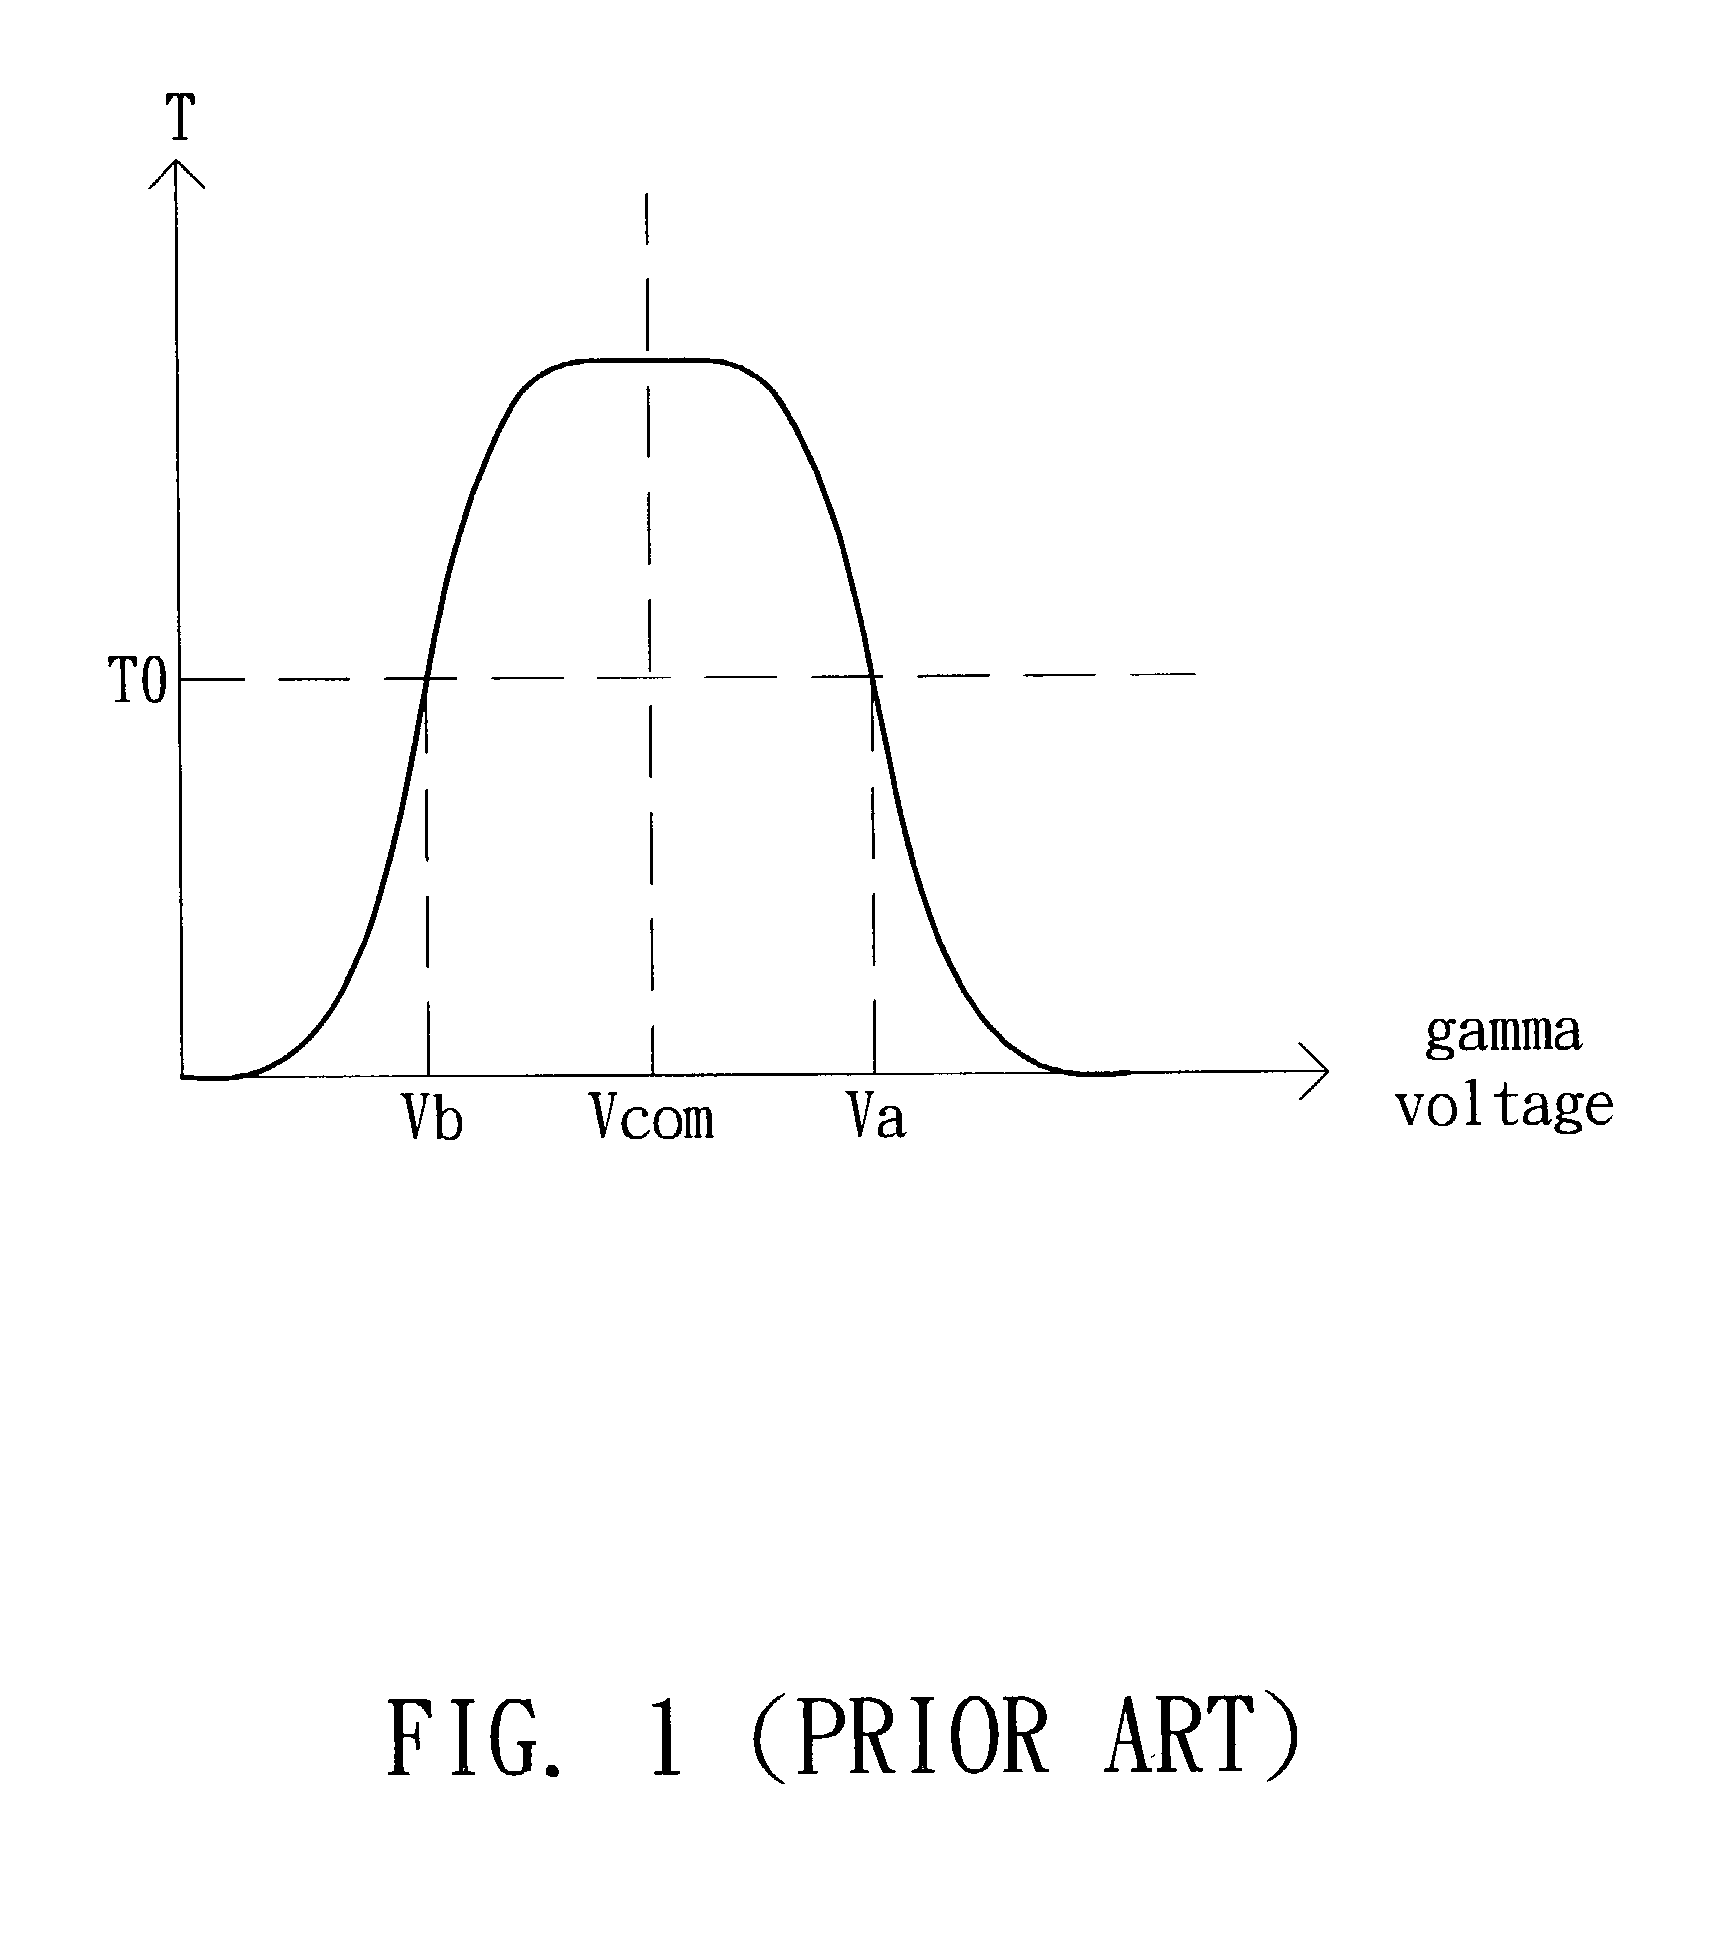 Apparatus for converting a digital signal to an analog signal for a pixel in a liquid crystal display and method therefor